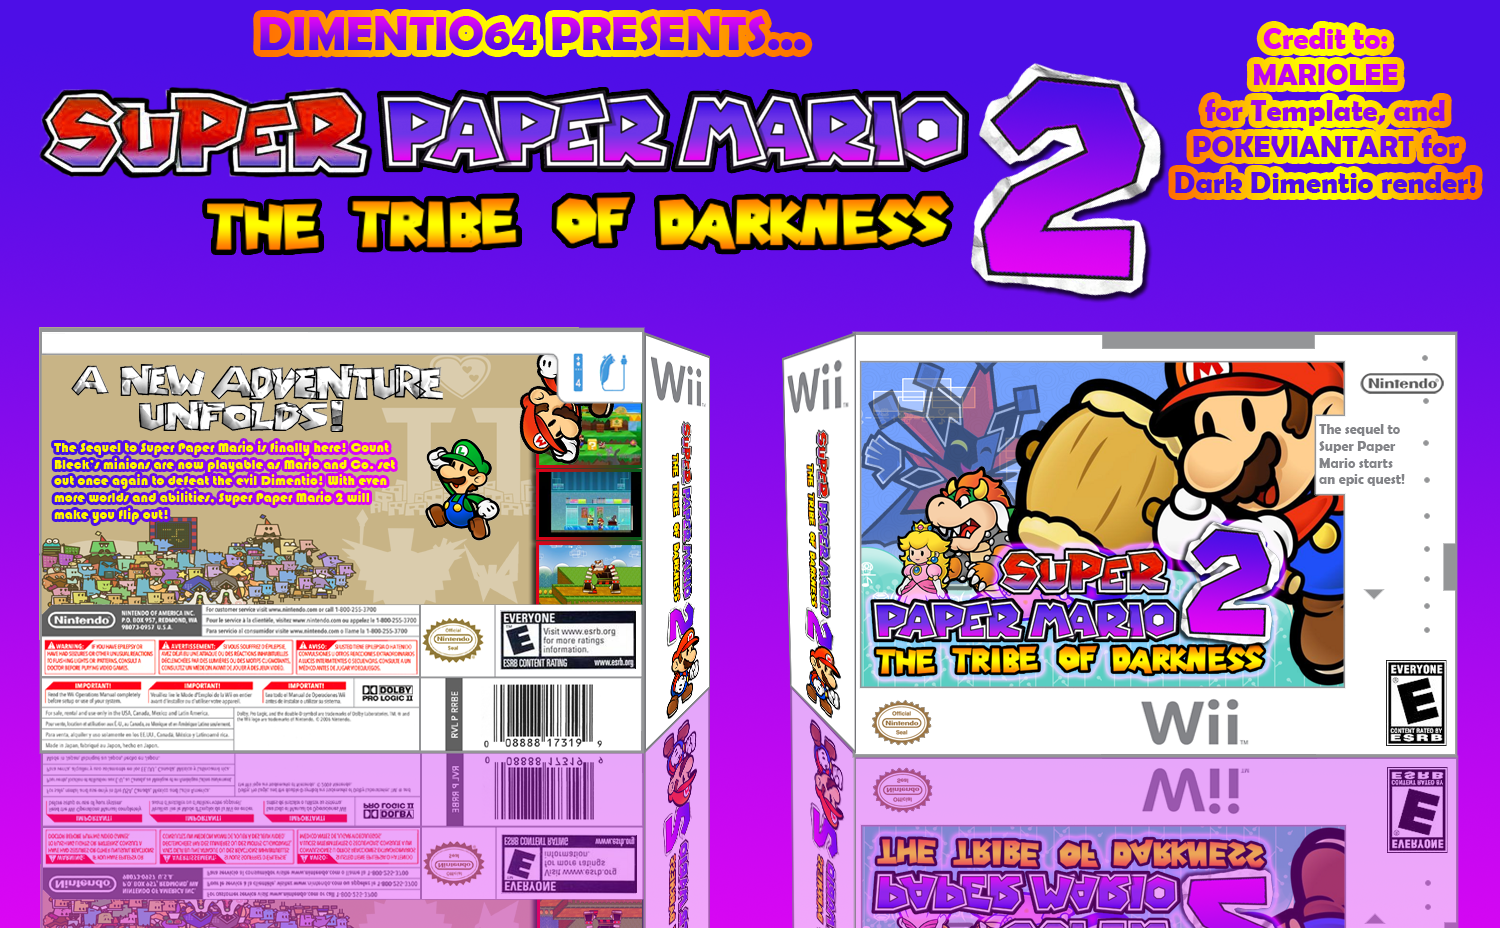 Super Paper Mario 2: The Tribe of Darkness box cover